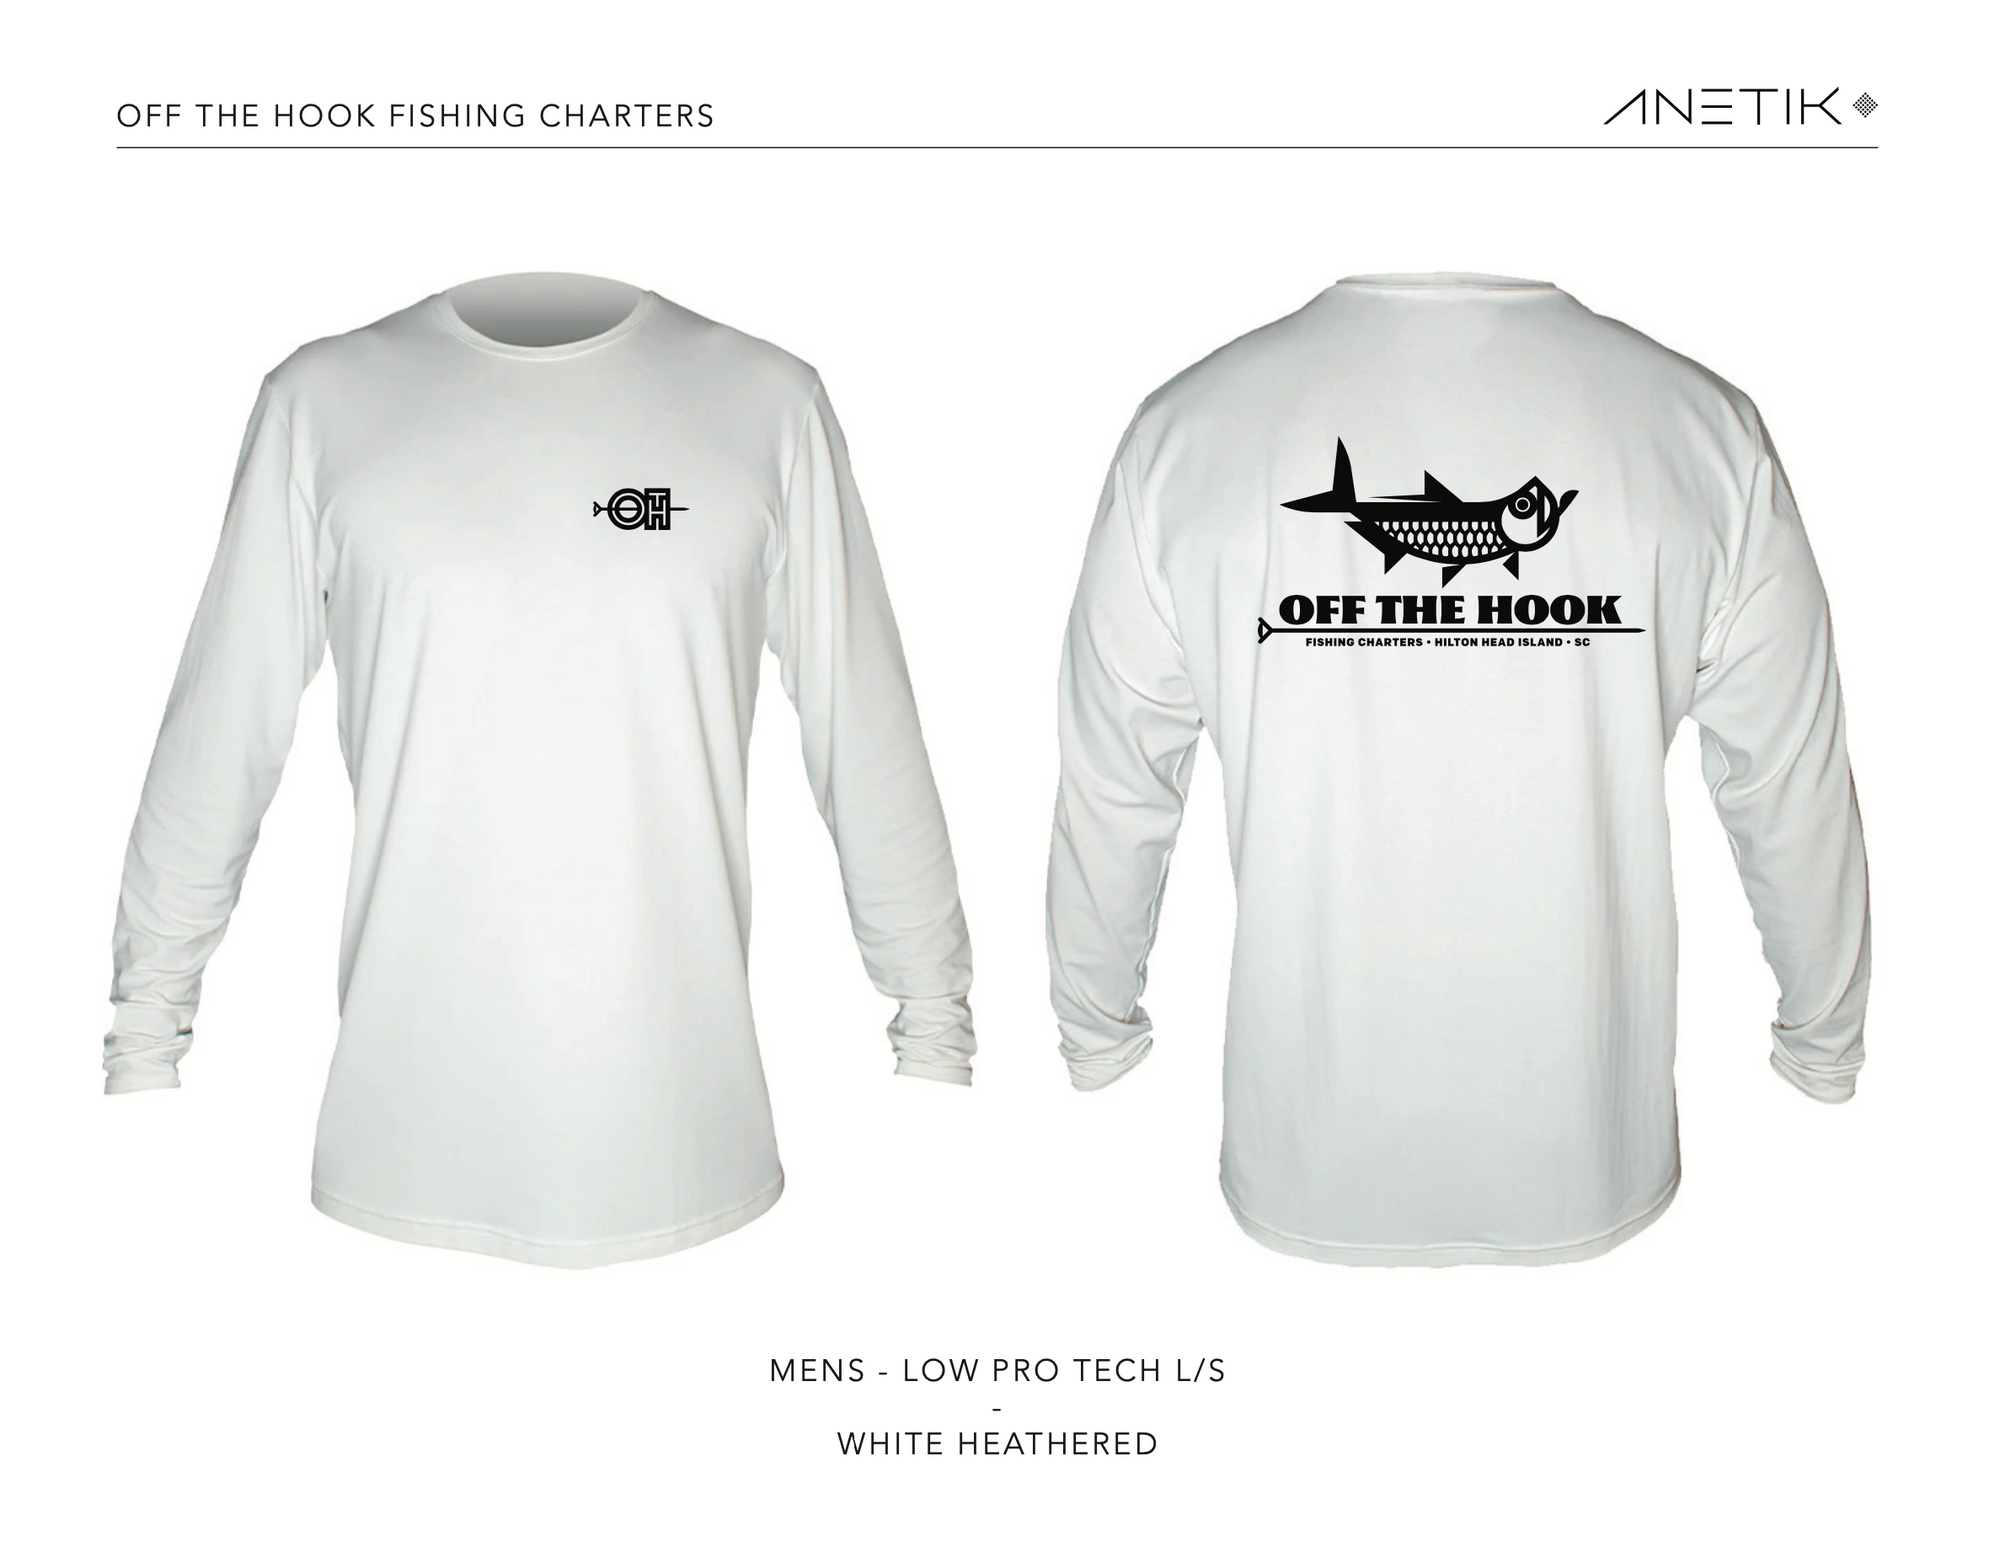 Off The Hook - Anetik - Low Pro Tech L/S - Sky Heathered